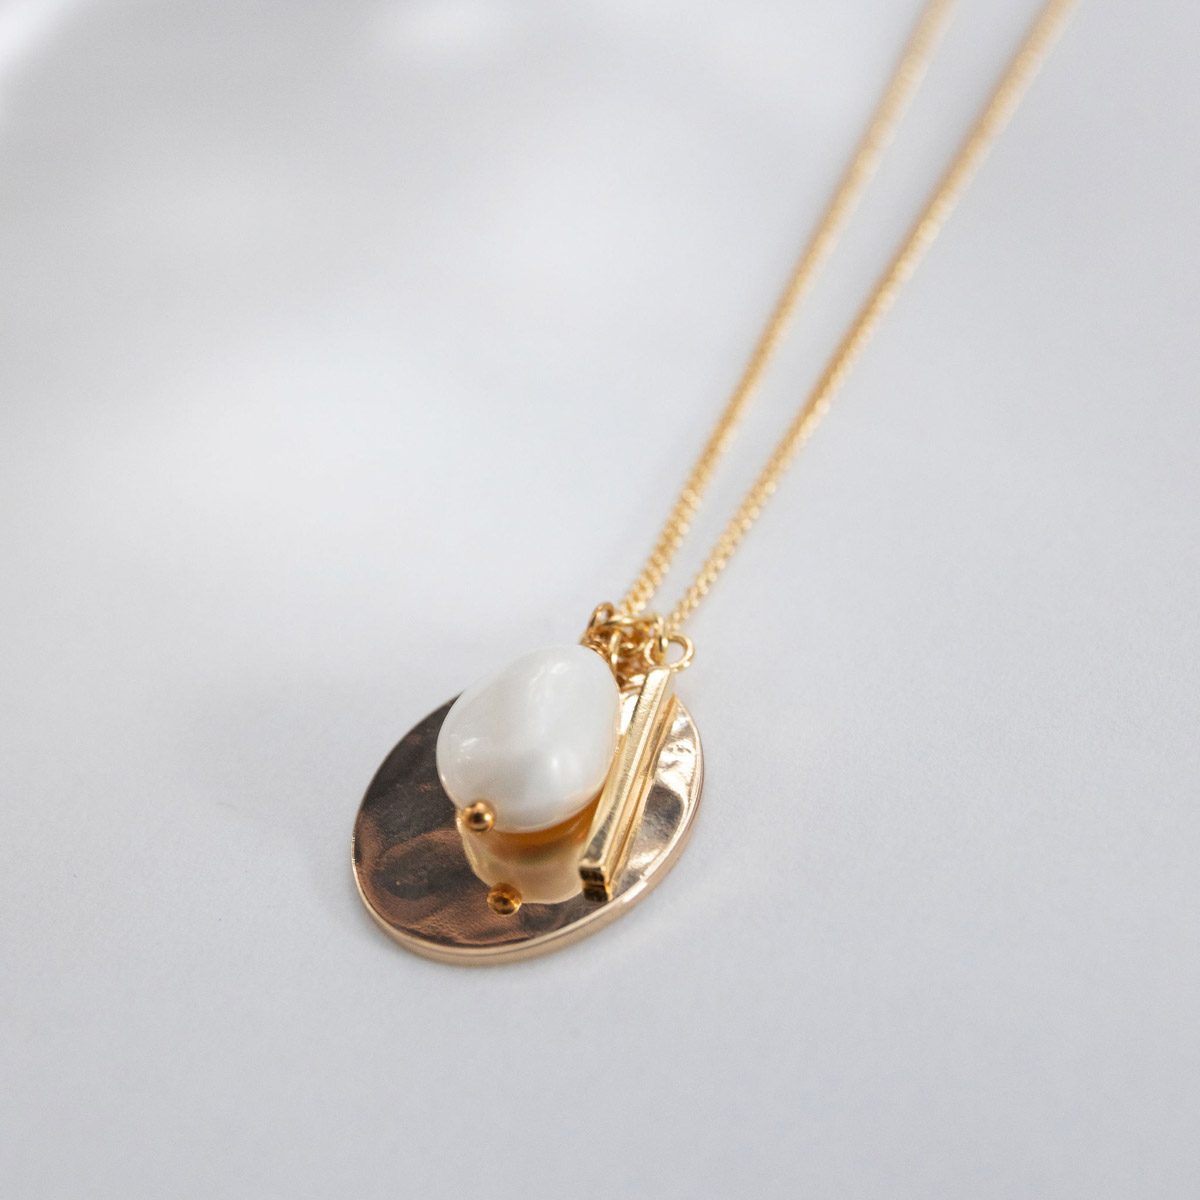 The Lady of the Empyrean Necklace, a white baroque pearl and tiny gold stick charm over a hammered oval pendant, strung on a dainty curb chain.